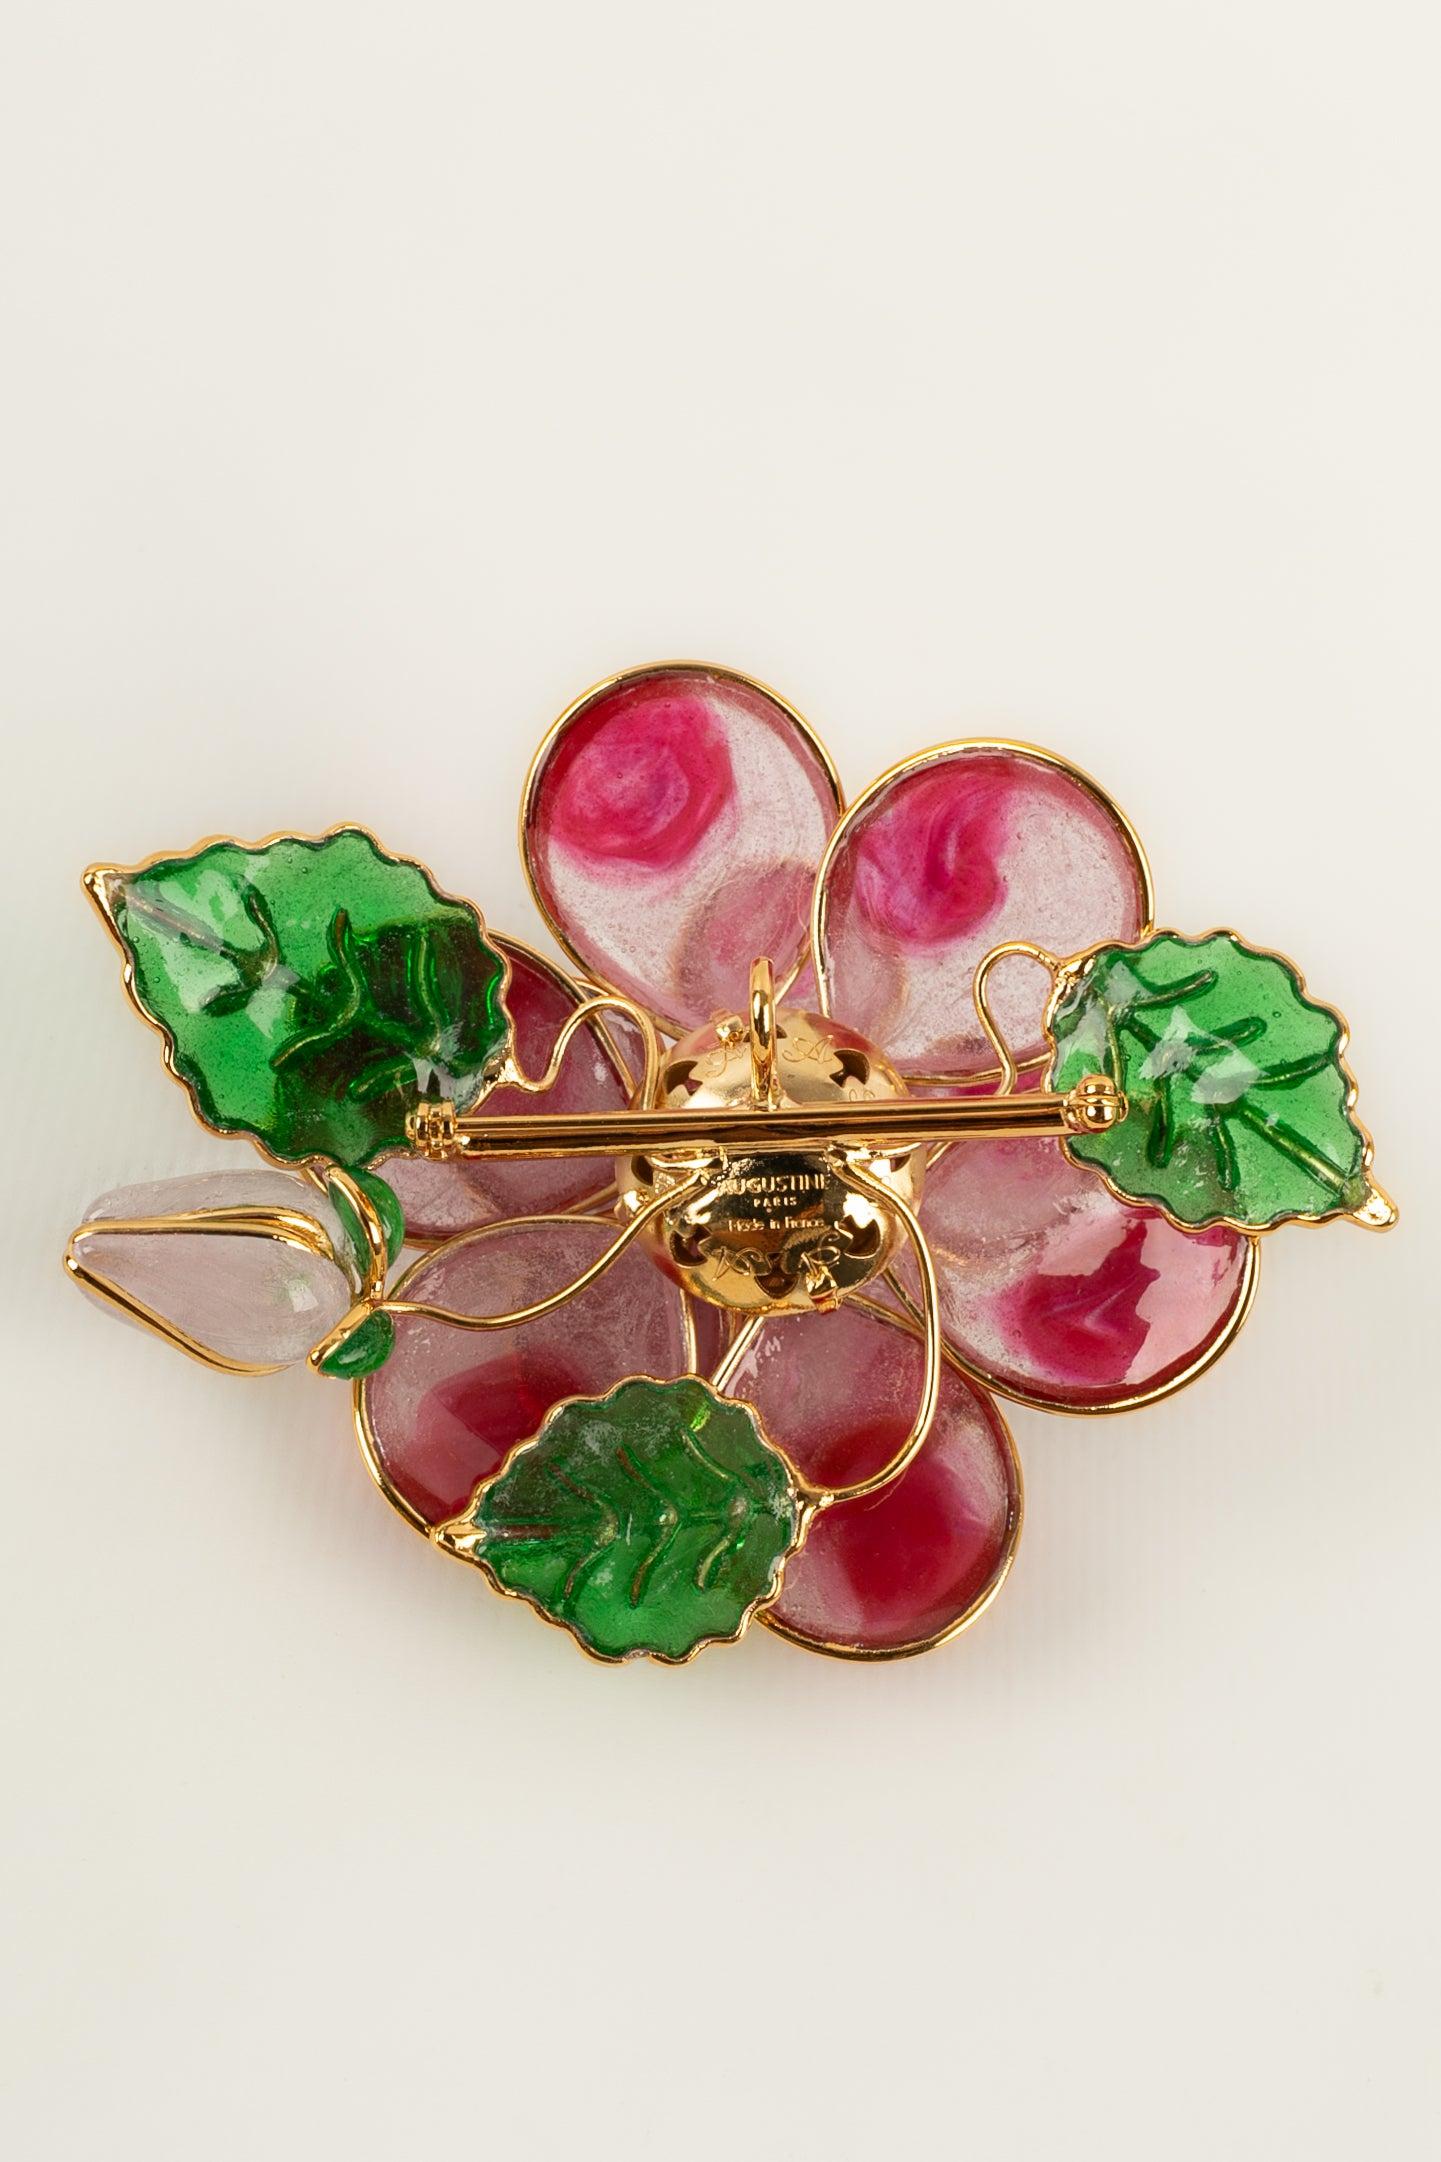 Augustine - (Made in France) Brooch / pendant in gold-plated metal and glass paste in red tones representing a flower.

Additional information:
Condition: Very good condition
Dimensions: 6.5 cm x 7.5 cm

Seller Reference: BR139
